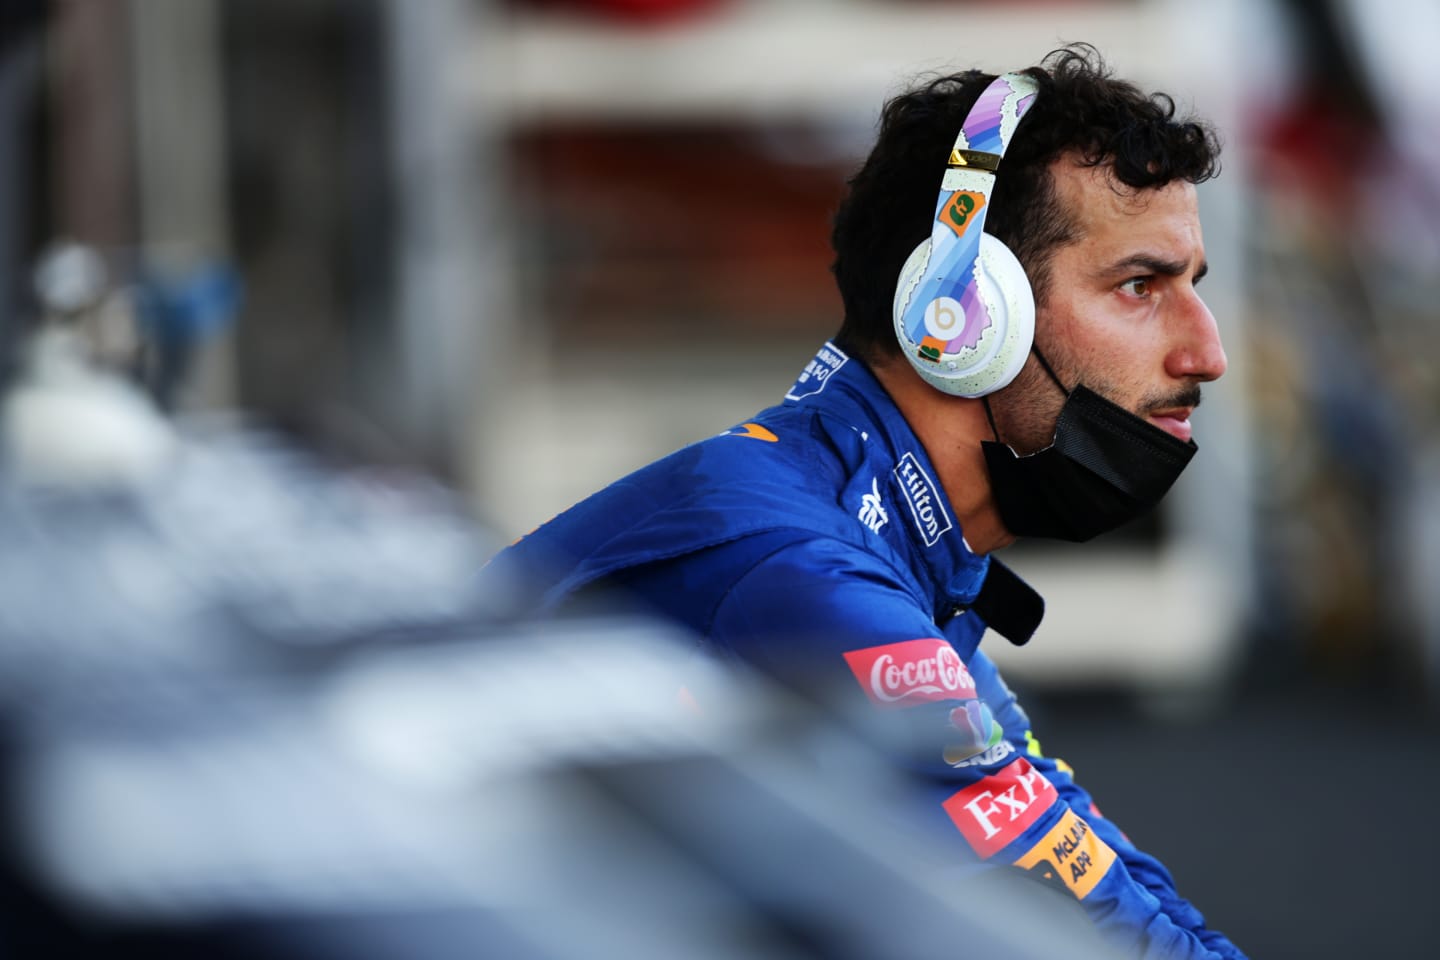 BAKU, AZERBAIJAN - JUNE 06: Daniel Ricciardo of Australia and McLaren F1 looks on from the pitlane during a red flag period during the F1 Grand Prix of Azerbaijan at Baku City Circuit on June 06, 2021 in Baku, Azerbaijan. (Photo by Peter Fox/Getty Images)